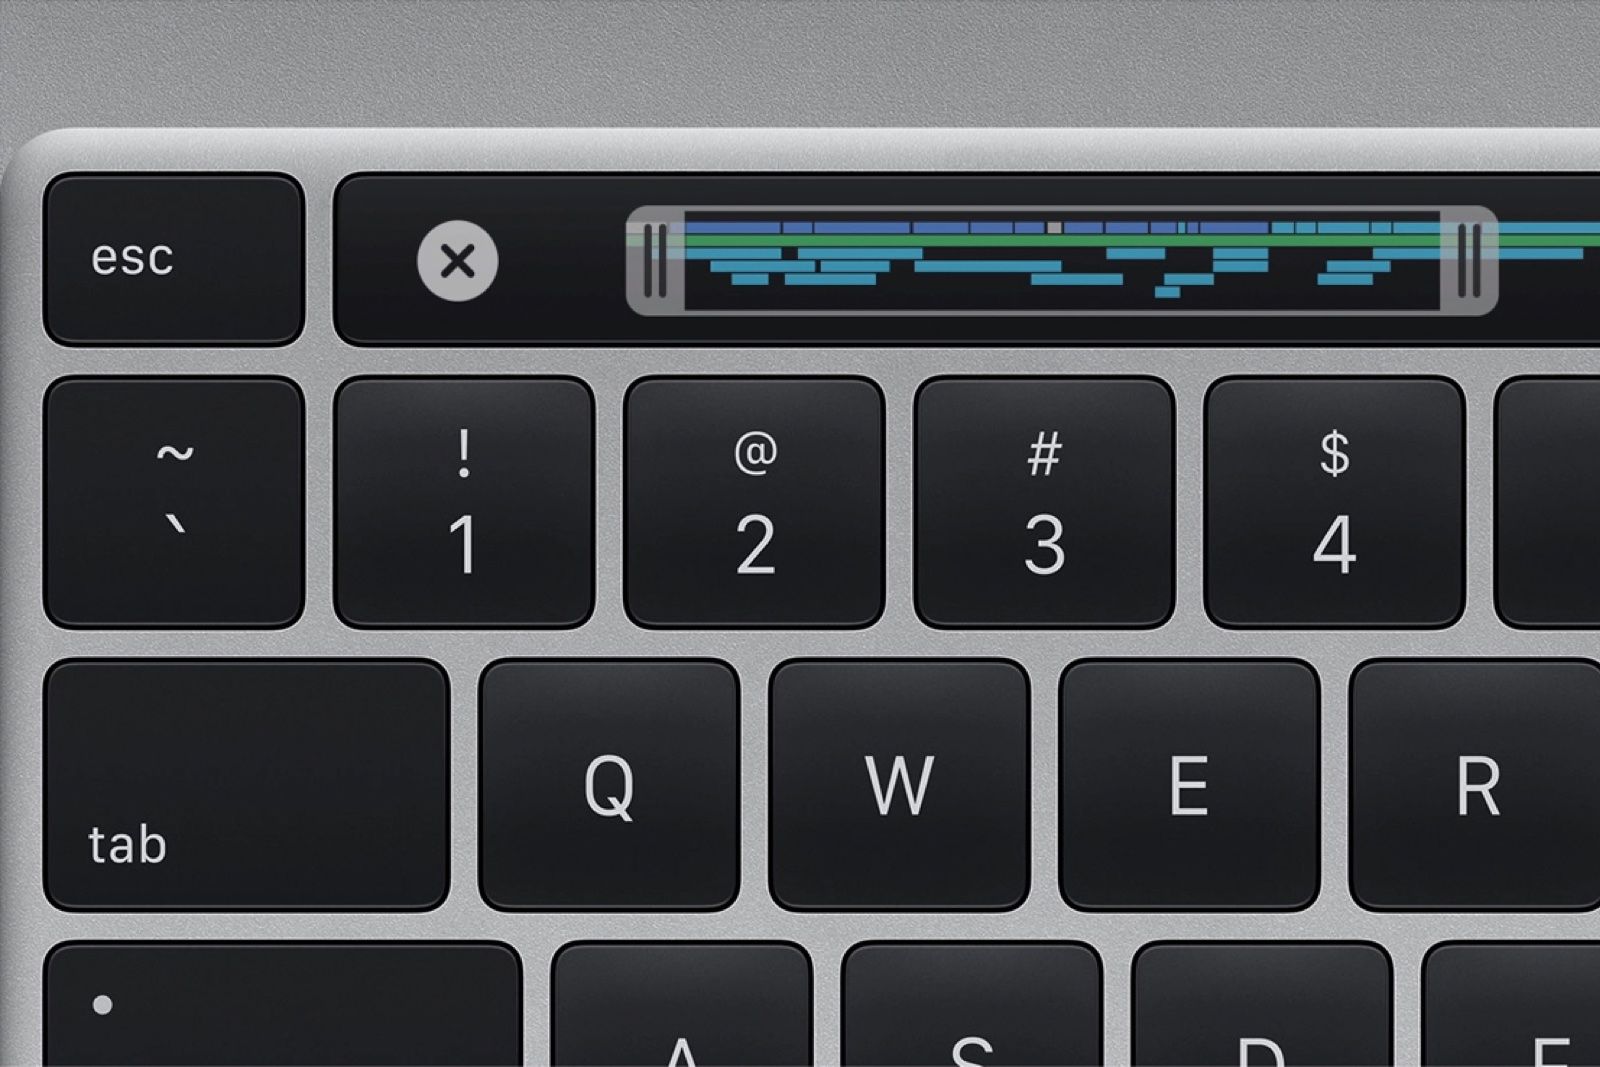 Its Official 16-inch Macbook Pro Debuts With Scissor-mechanism Keyboard image 4